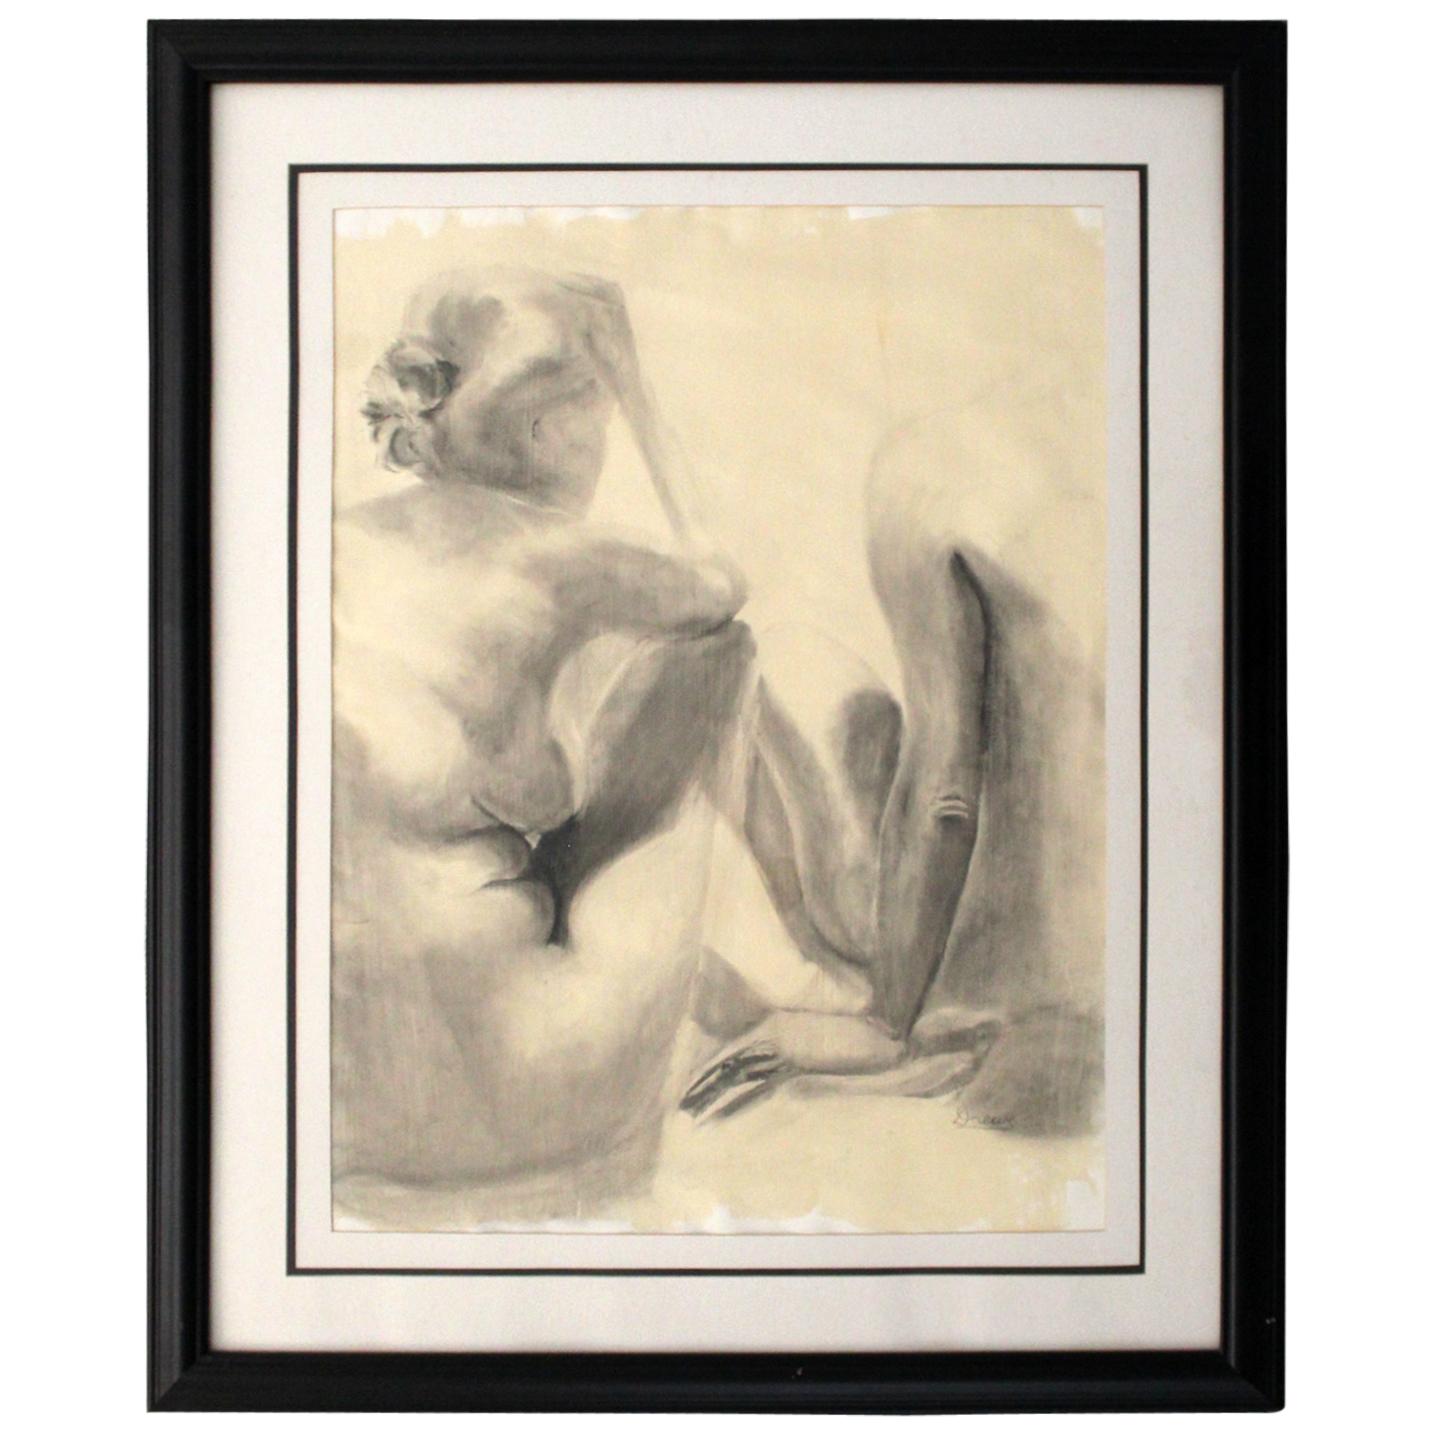 Contemporary Modern Framed Charcoal Drawing Signed Drewe Nude Figure Drawing For Sale